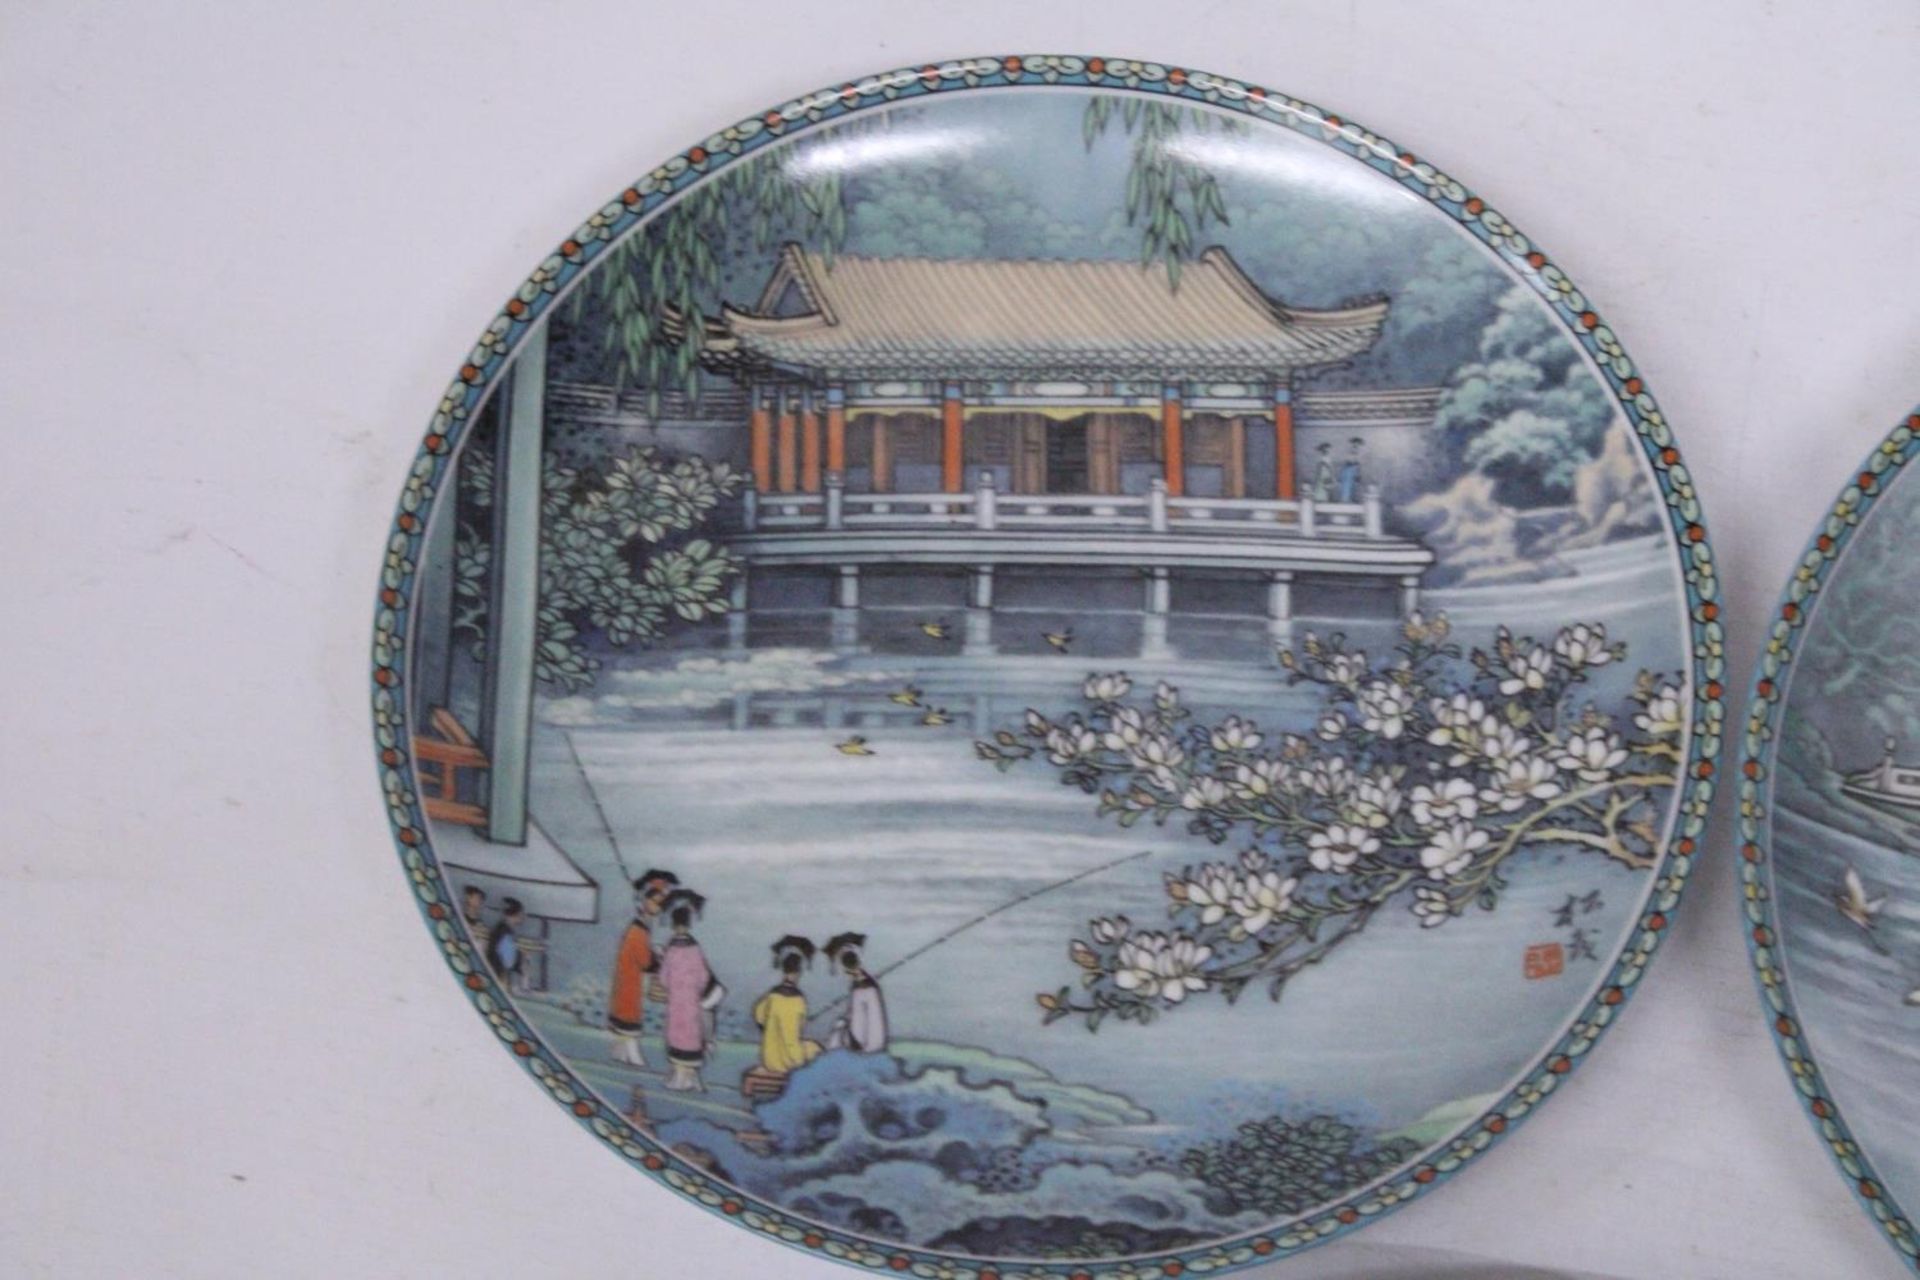 FIVE VINTAGE IMPERIAL JINGDEZHEN PORCELAIN PLATES SCENES FROM THE SUMMER PALACE - 21 CM - Image 2 of 8